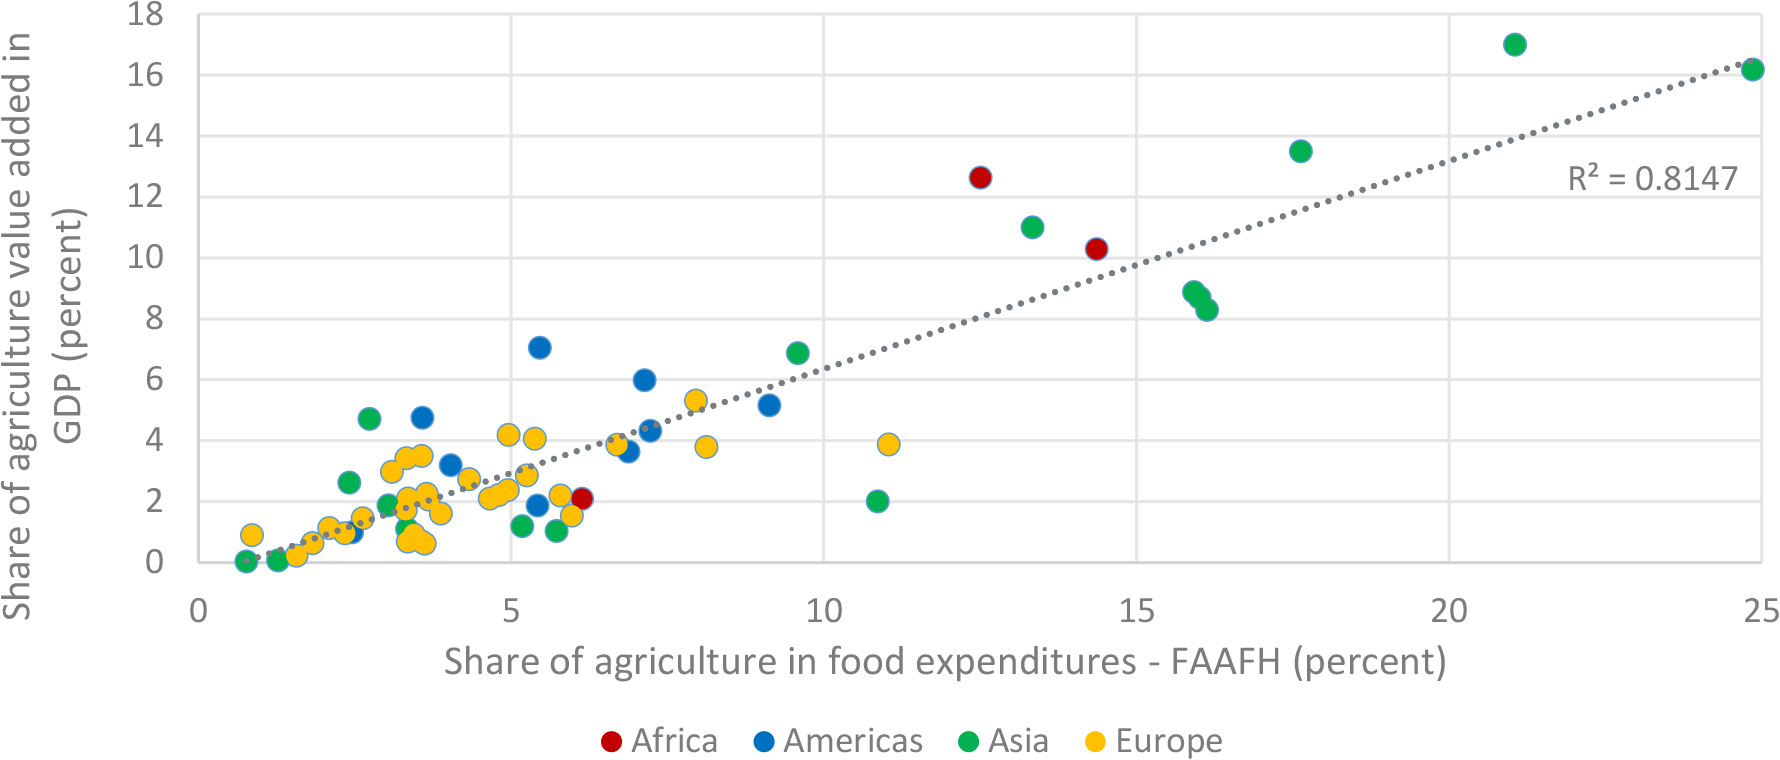 Share of agriculture in food expenditures compared to the share of agriculture value added in GDP, 2015. Note: Cambodia (x= 7.8; y= 26.6) is omitted from the chart as an outlier. Source: FAO. 2022. FAOSTAT: Industry and primary factors decomposition. In: FAO. Rome. Cited October 2022. https://www.fao.org/faostat/en/#data/GFDI.